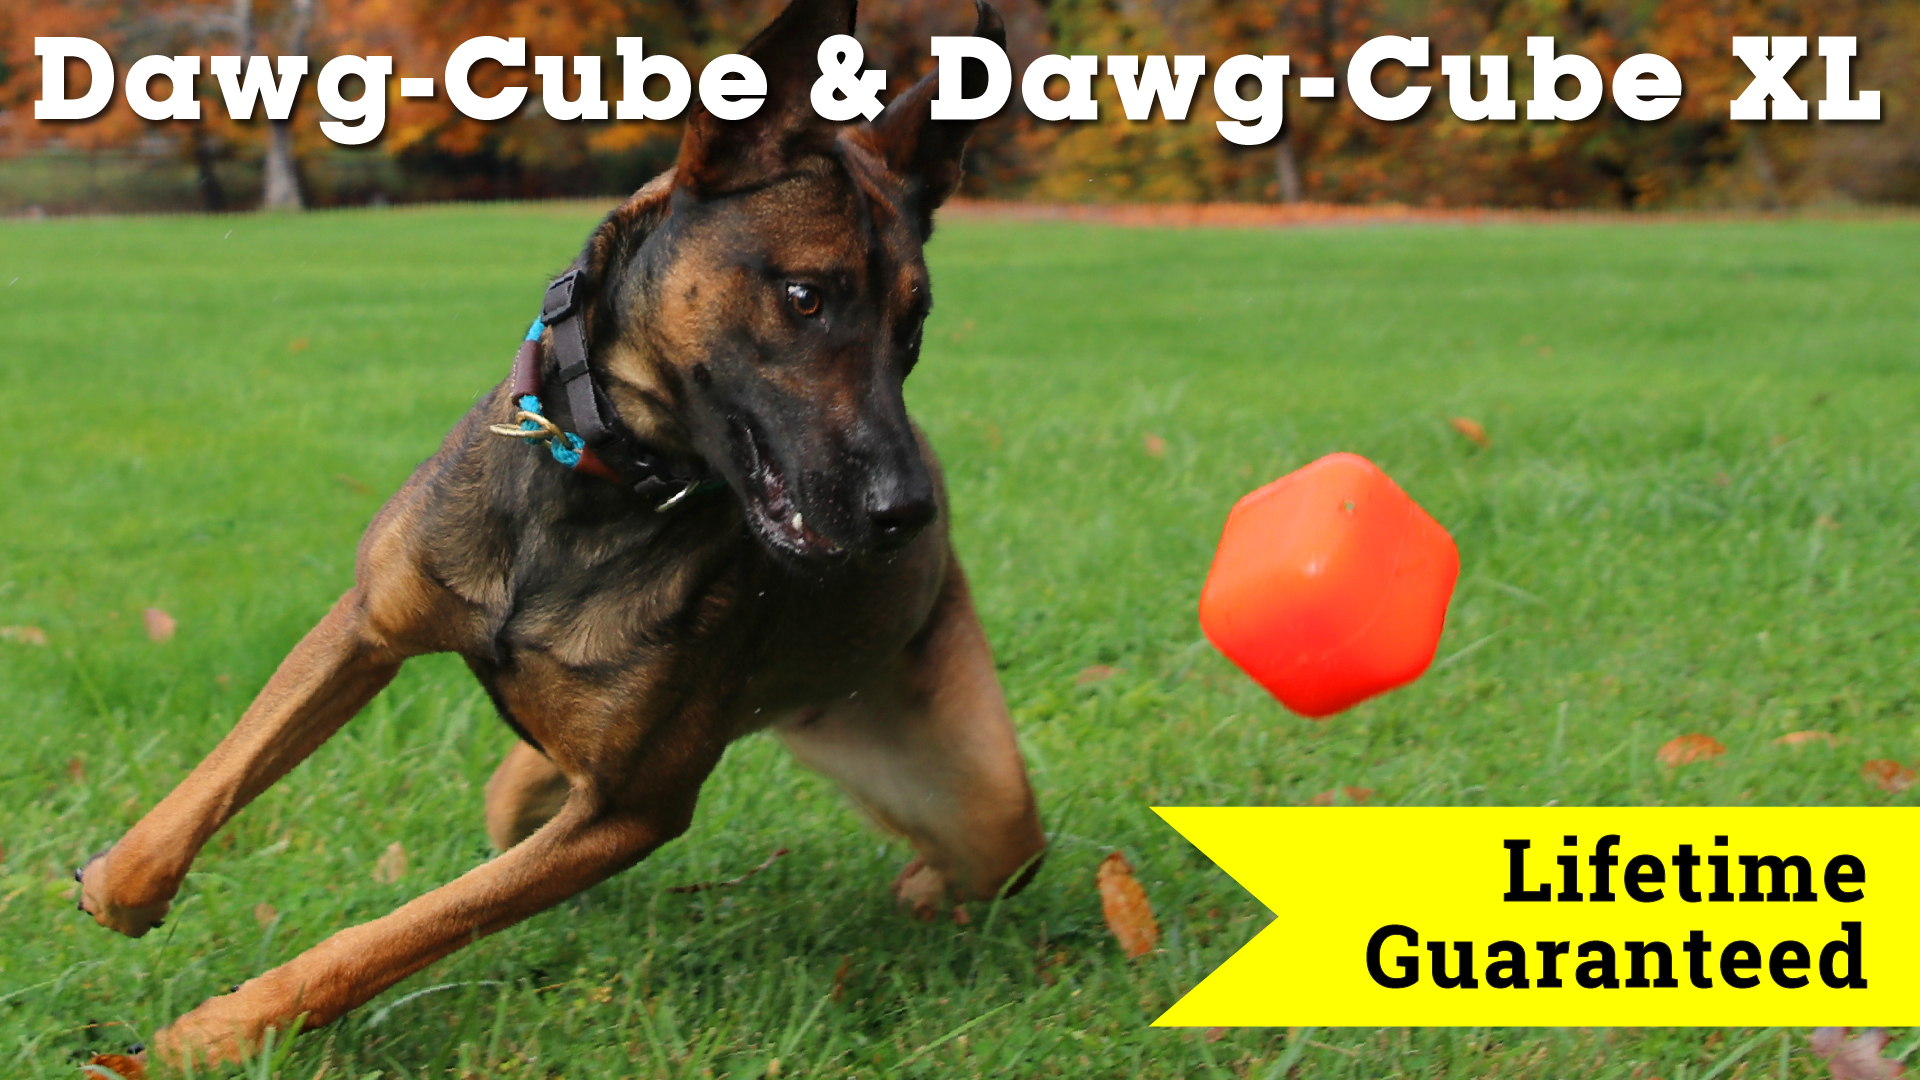 ruff dawg brand dawg cube xl bouncing in the grass being chased by a german shepherd dog